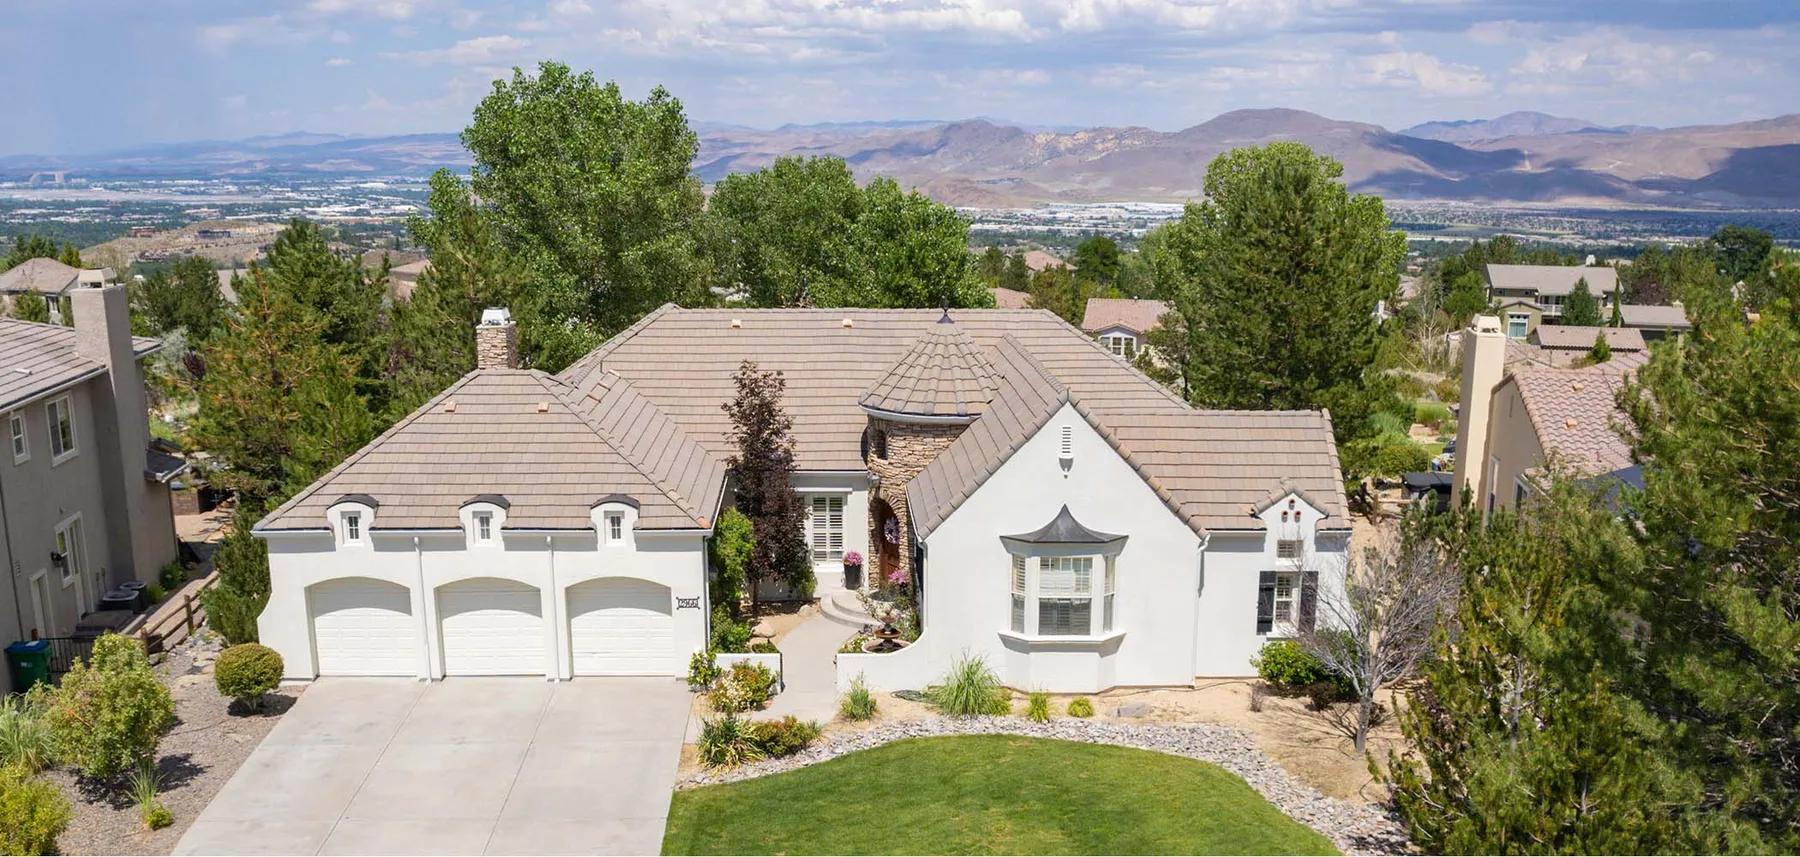 Find Luxury Real Estate in Reno | Corcoran Global Living